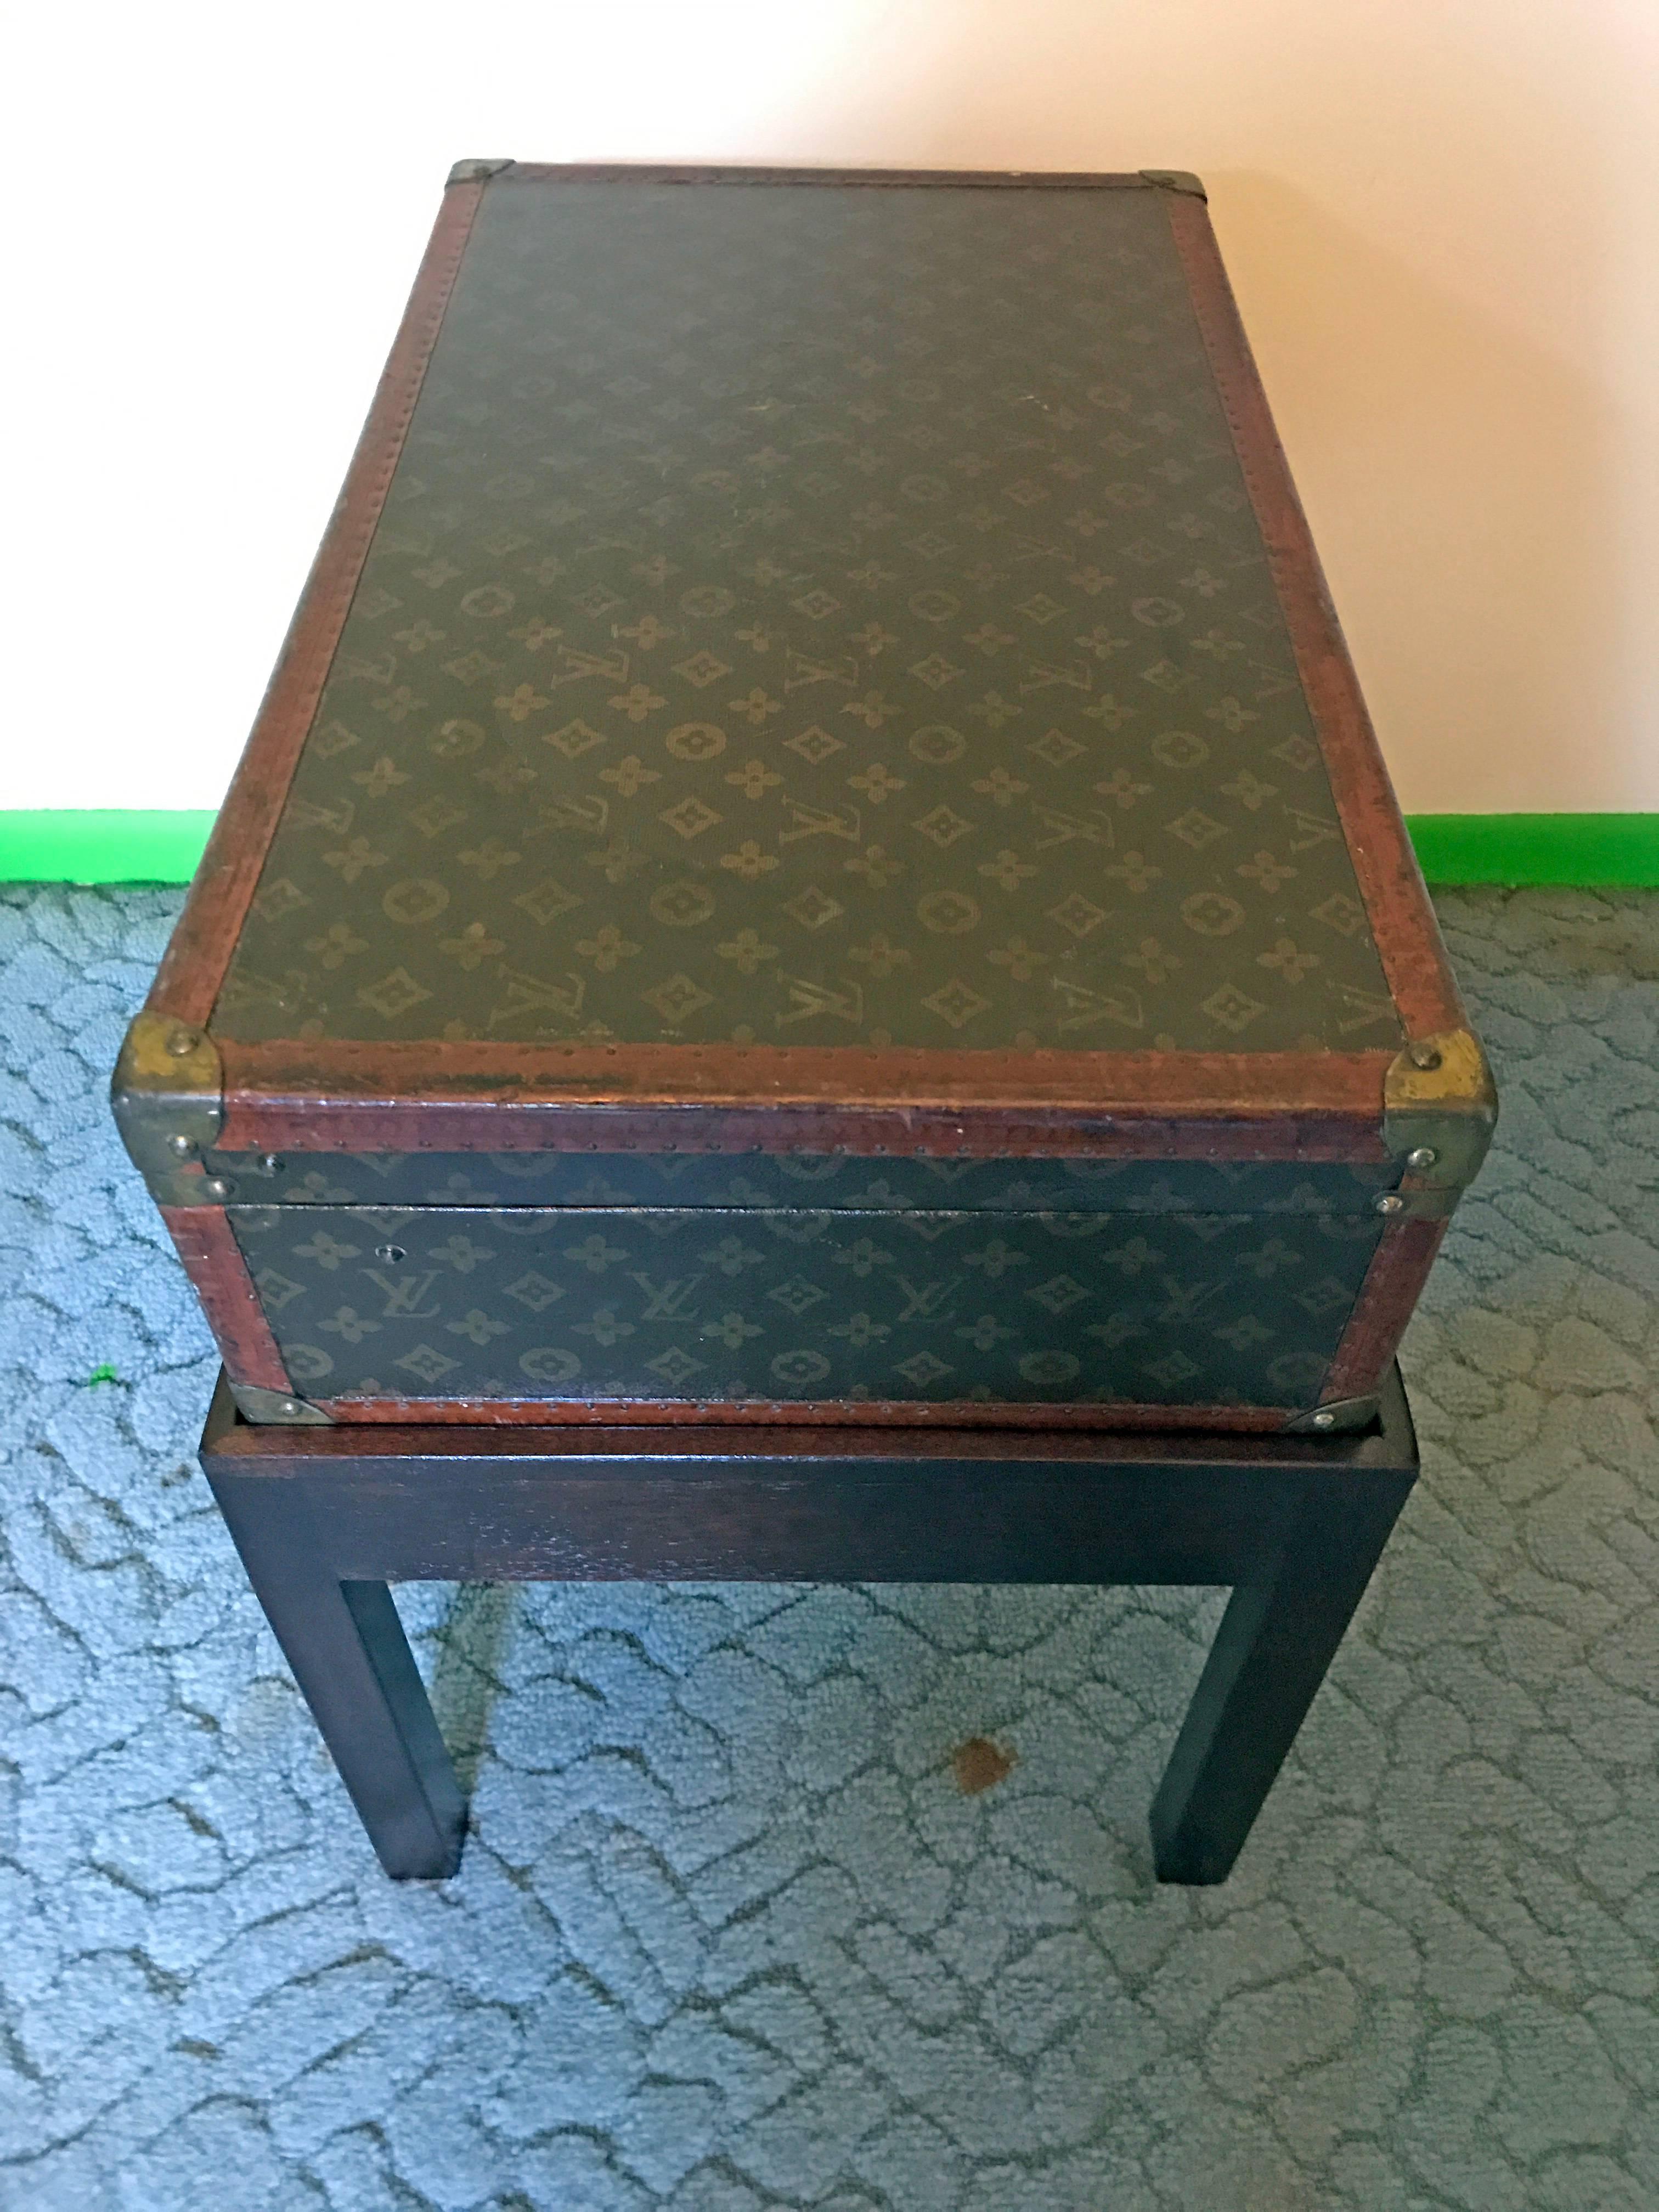 Louis Vuitton steamer trunk on stand, nice intermediate sized vintage Louis Vuitton case on a custom mahogany stand.
Measures: Trunk 25.75 W x 15.25 D x 7 in H
Base 27 in W x 16.5 in D x 15.5 in H
Trunk and base 22.5 in H.